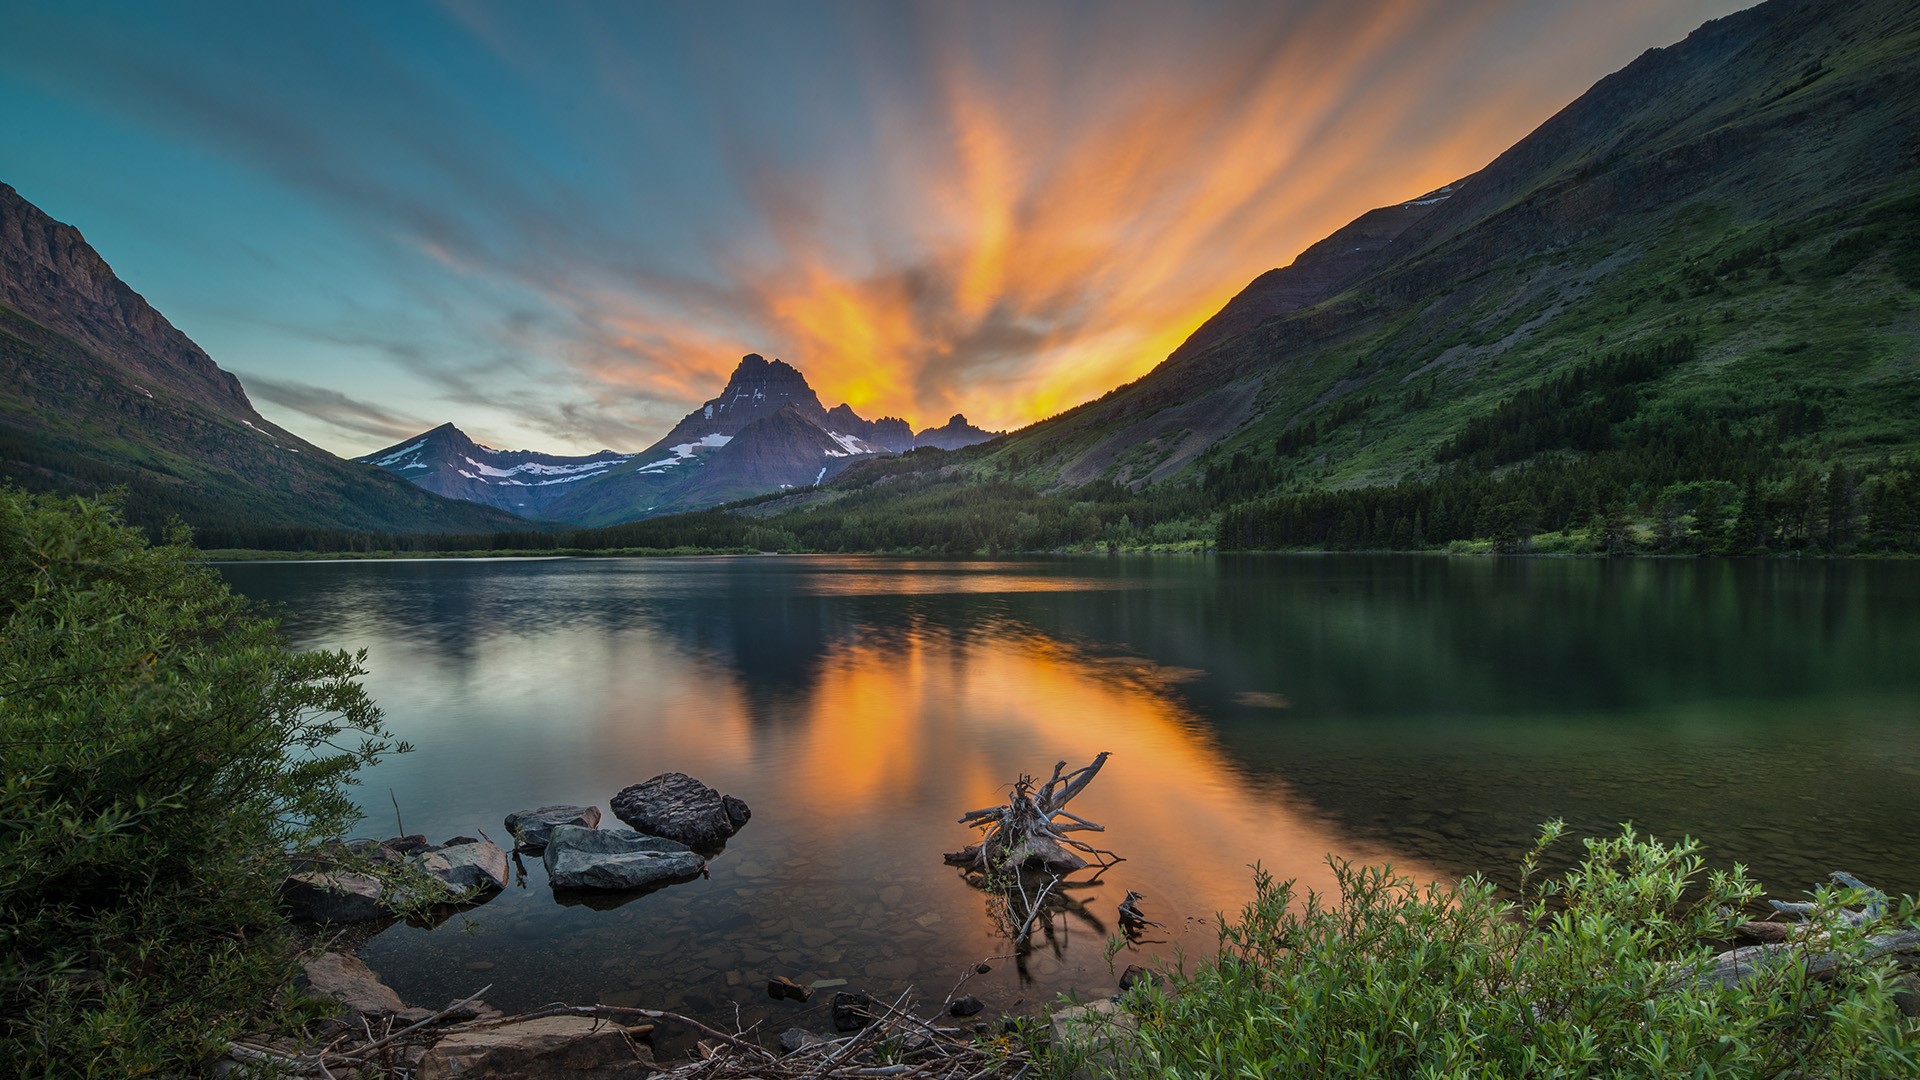 General 1920x1080 nature landscape clouds sky sunset water rocks plants trees lake mountains Swiftcurrent Lake Glacier National Park Montana USA